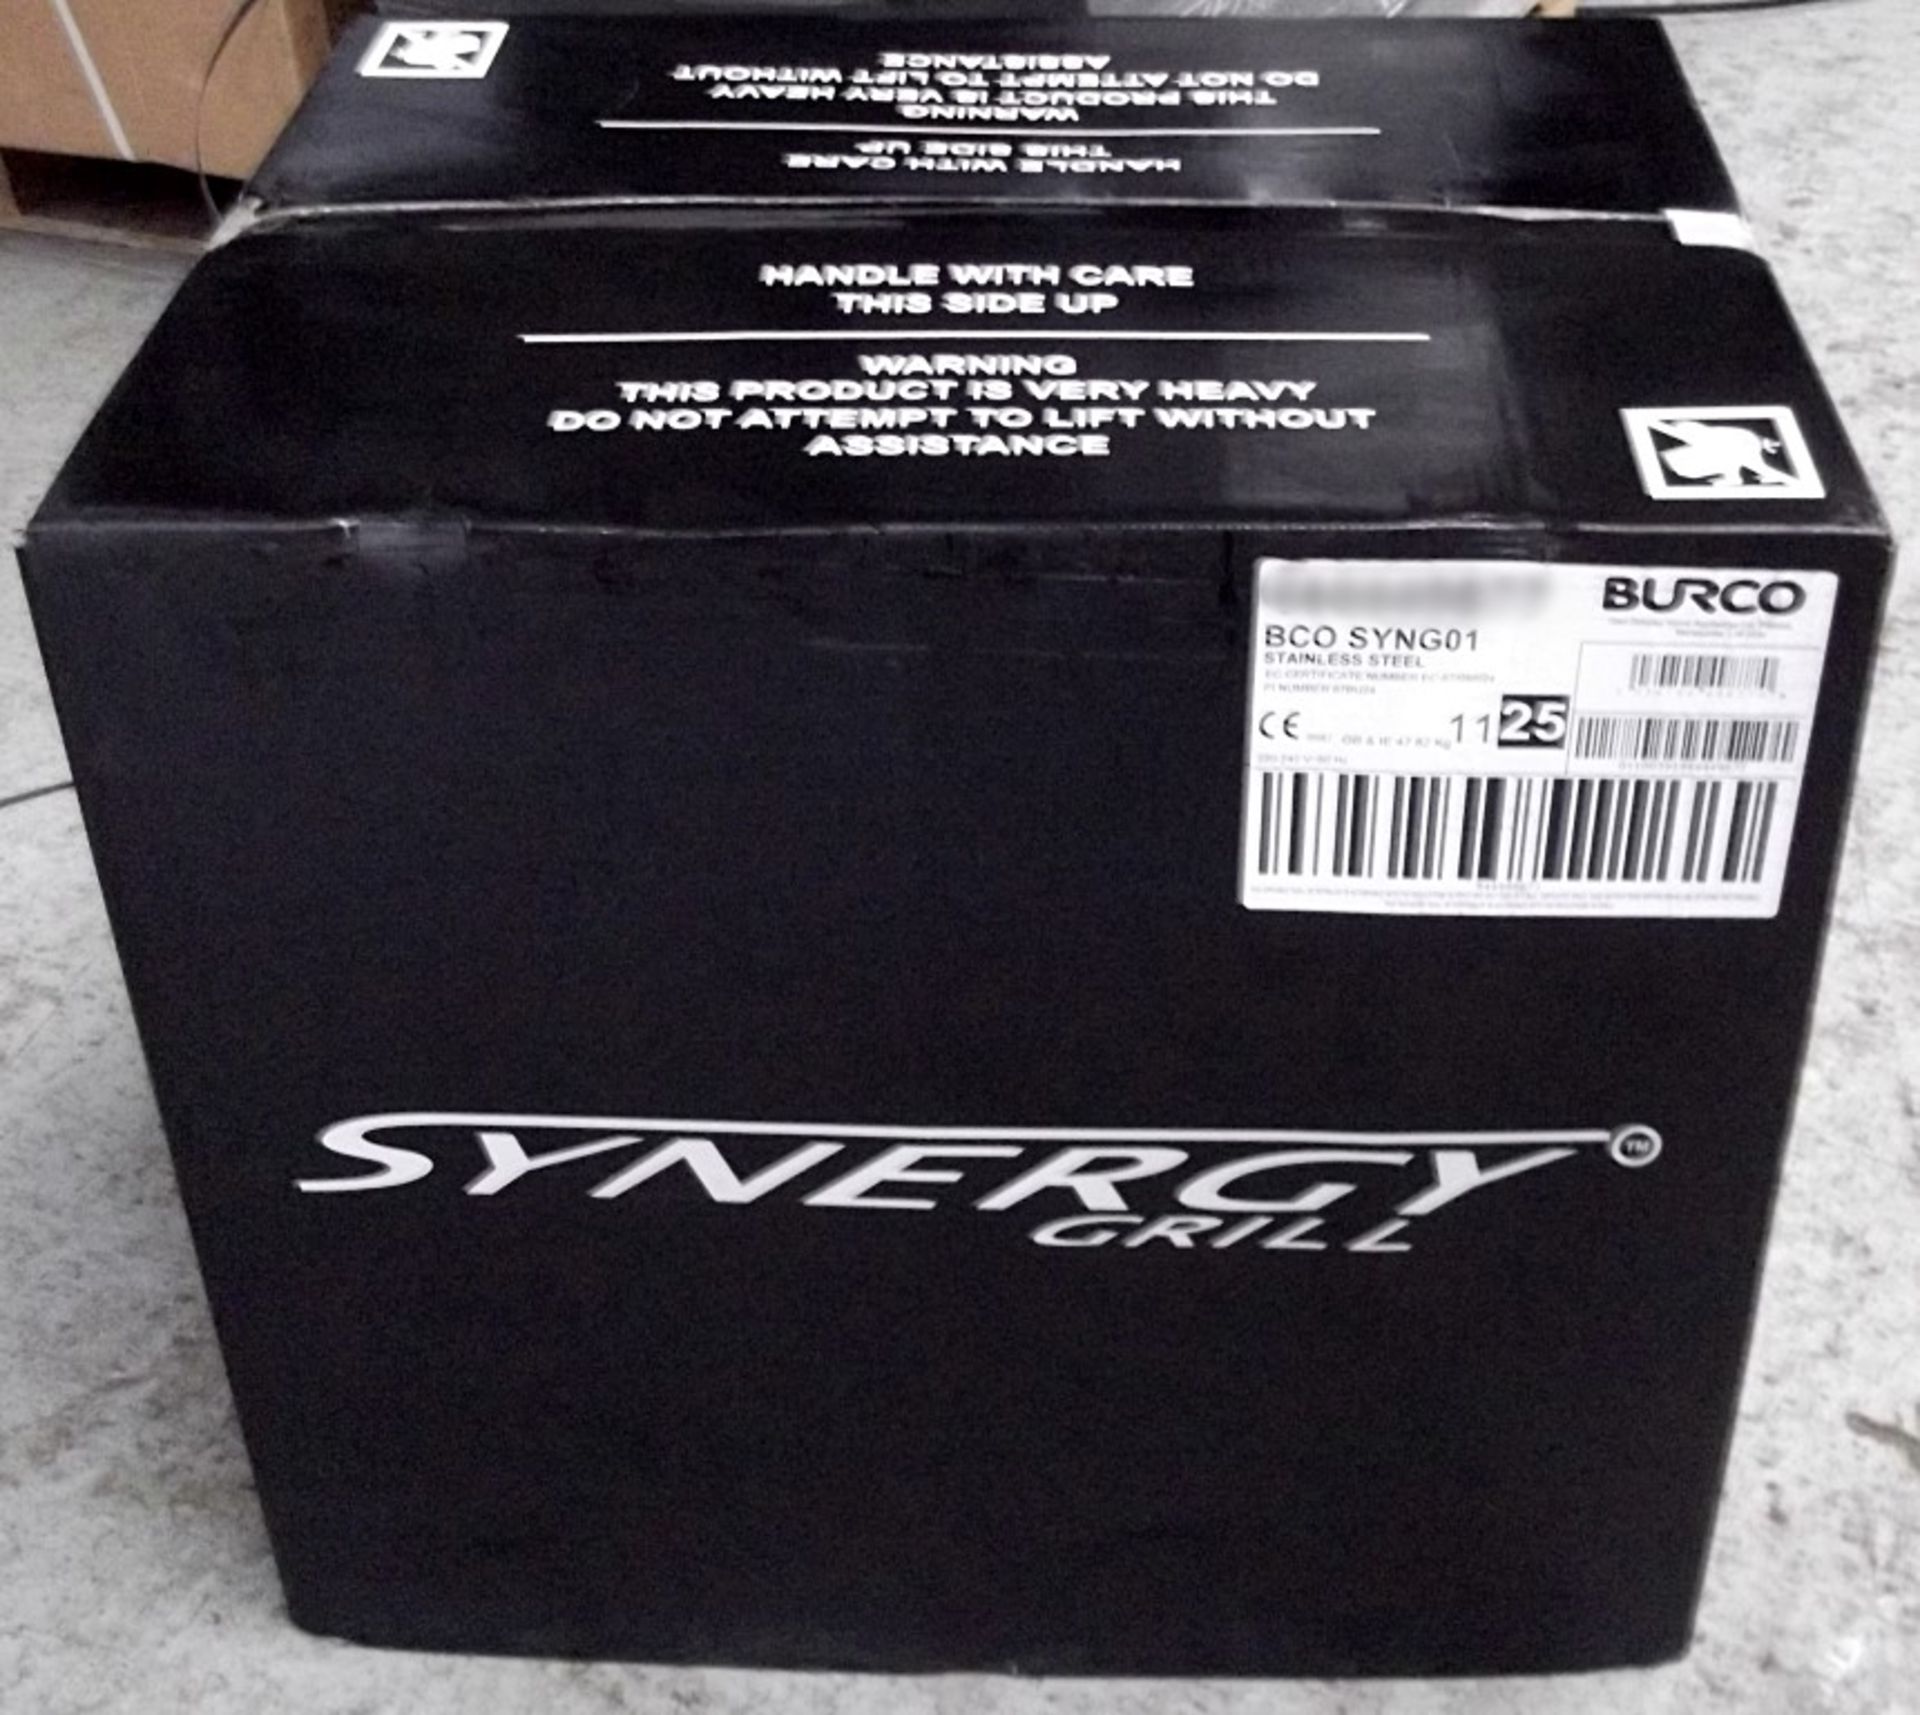 1 x Burco SYNG01 Fat Atomising Synergy Char Grill - Stainless Steel – New & Boxed – CL053 – - Image 3 of 3